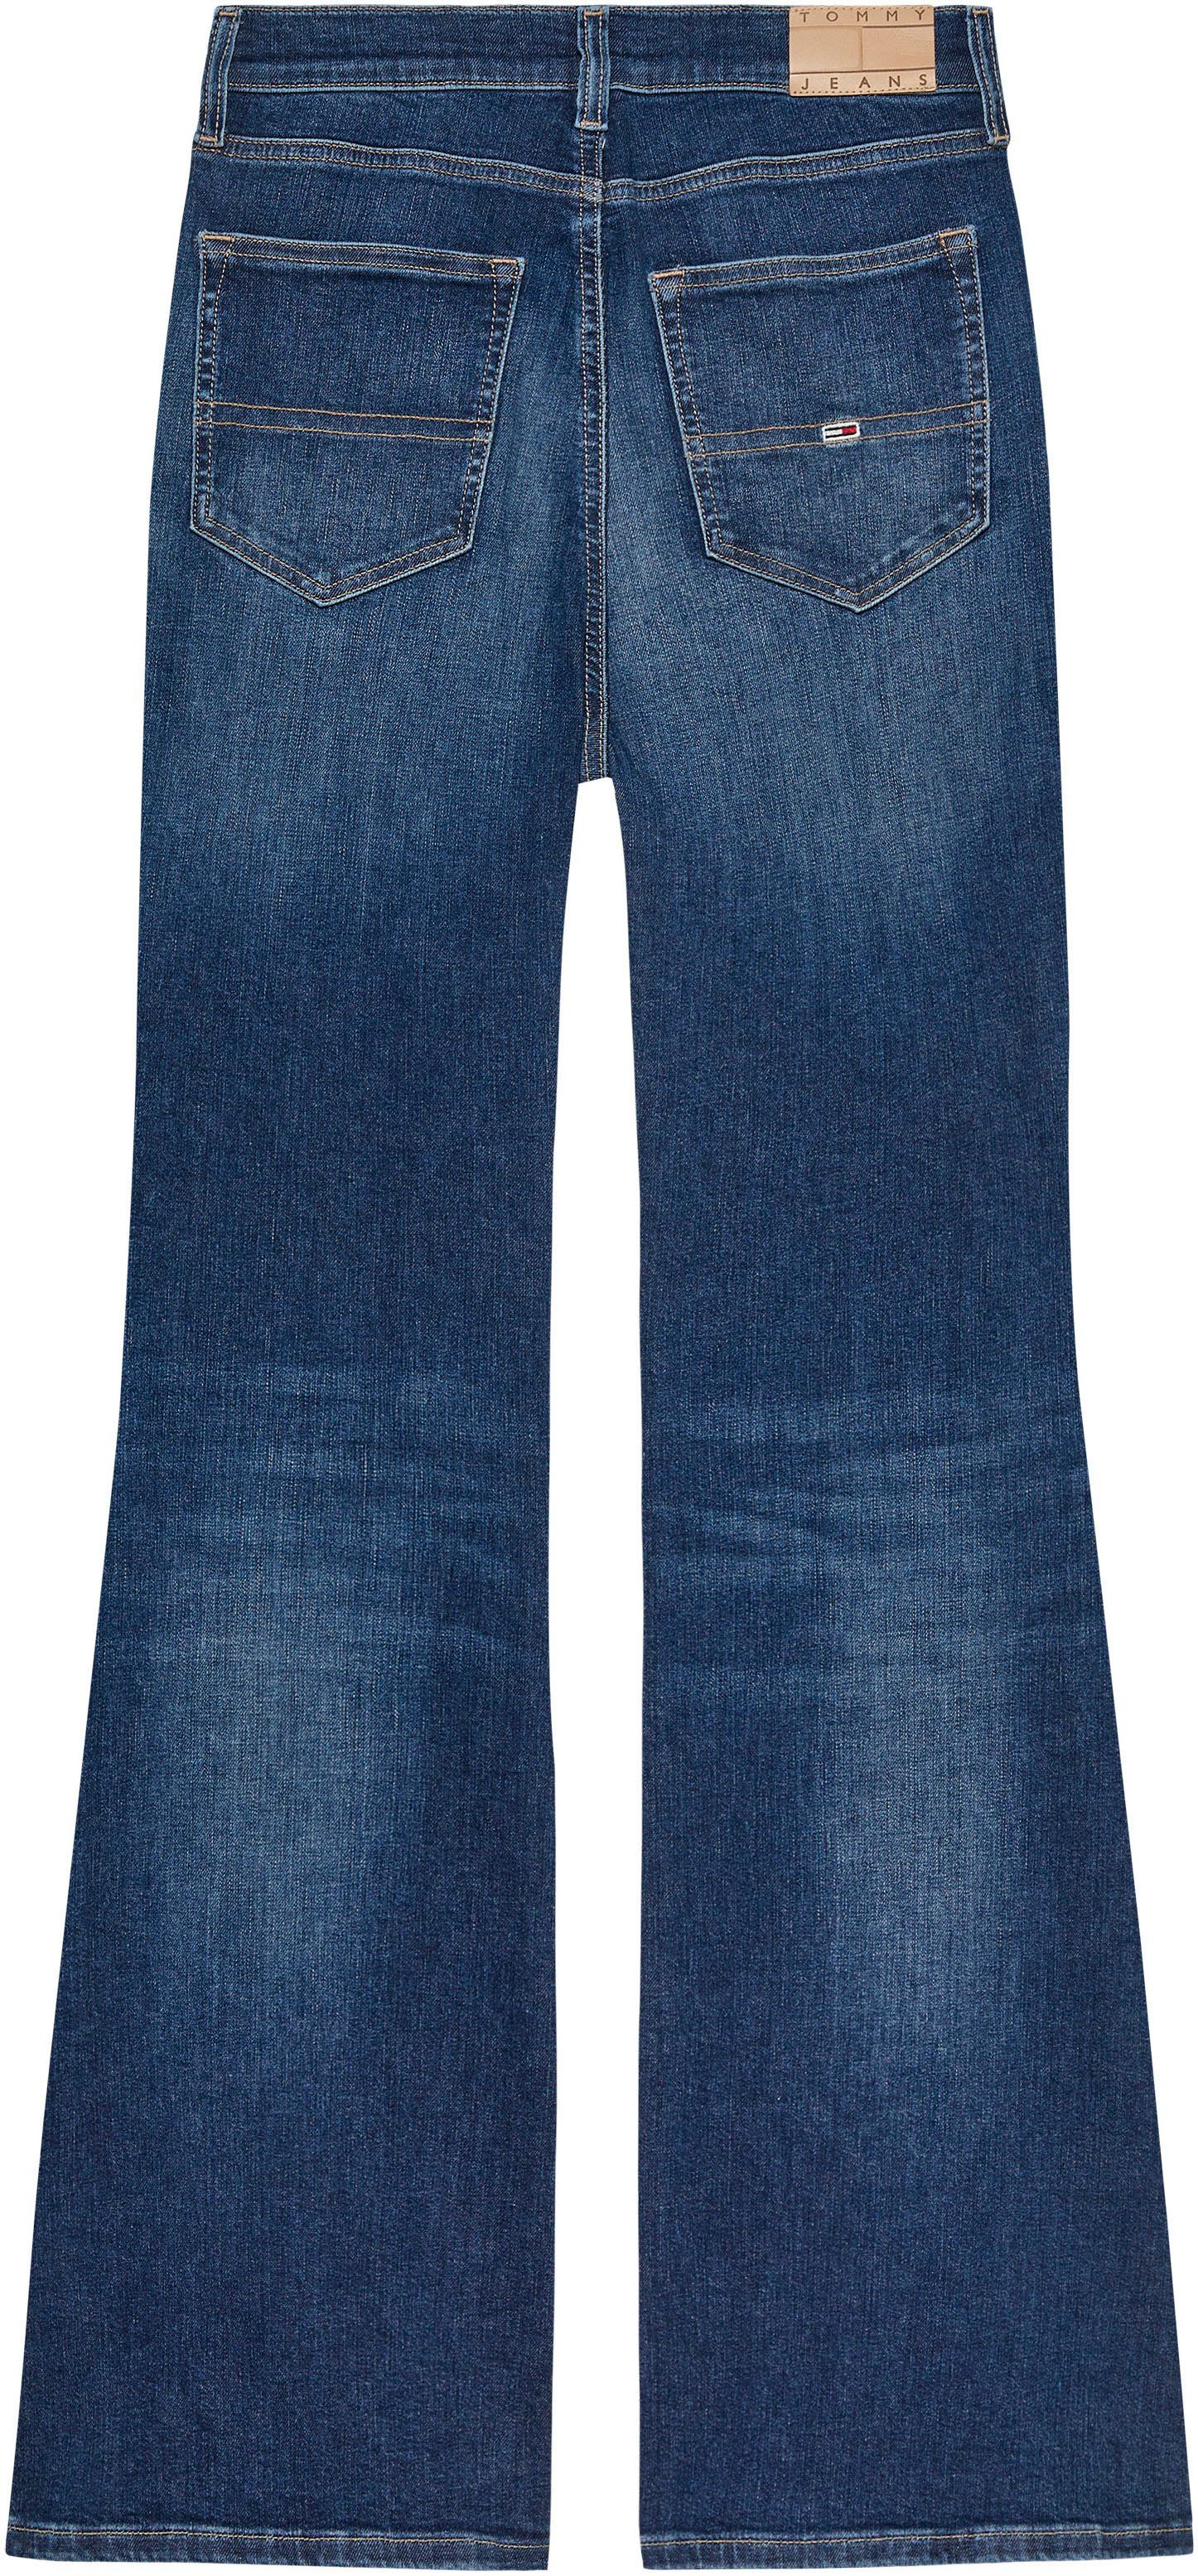 Tommy Jeans Bequeme Jeans blue30 mit mid Sylvia Markenlabel